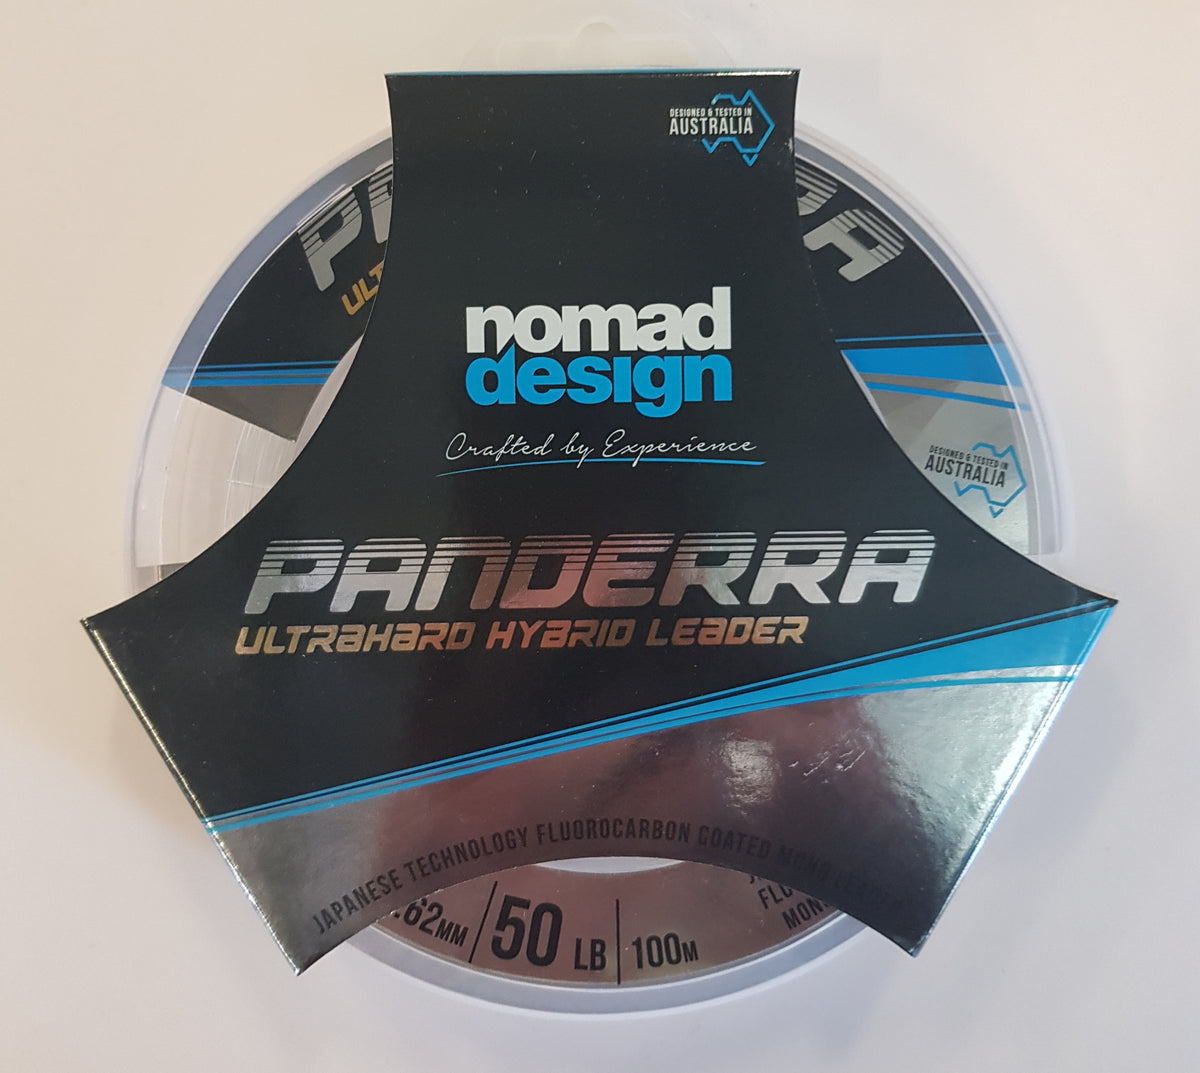 Now you can browse the newest collection of Nomad Design Panderra Ultrahard  Hybrid Leader 50lb 100m Nomad